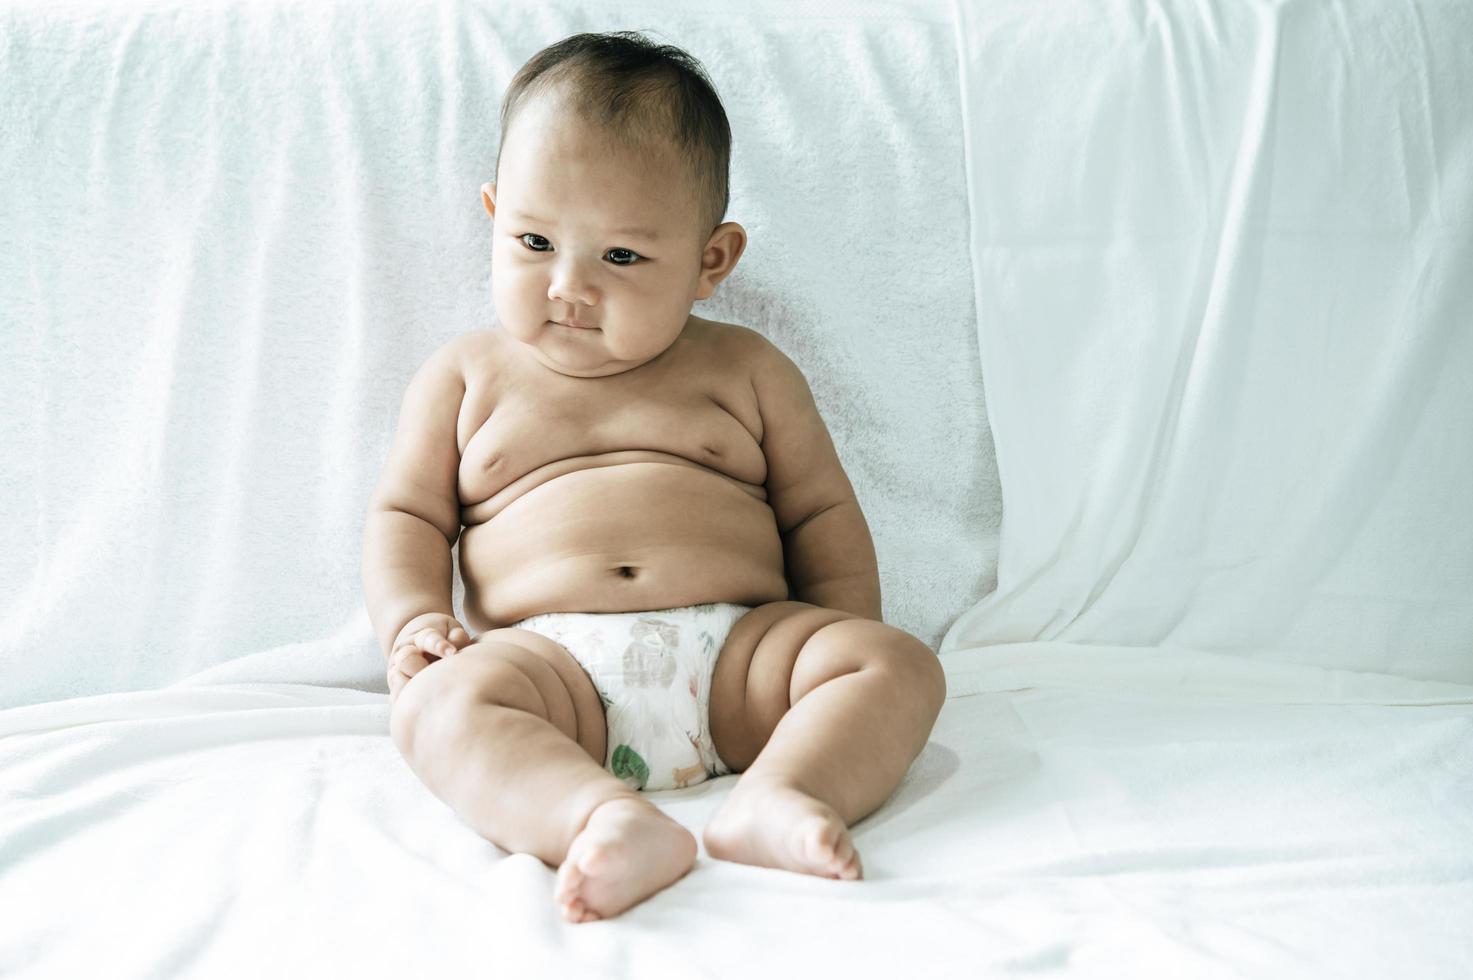 A baby learning to sit on a white bed photo